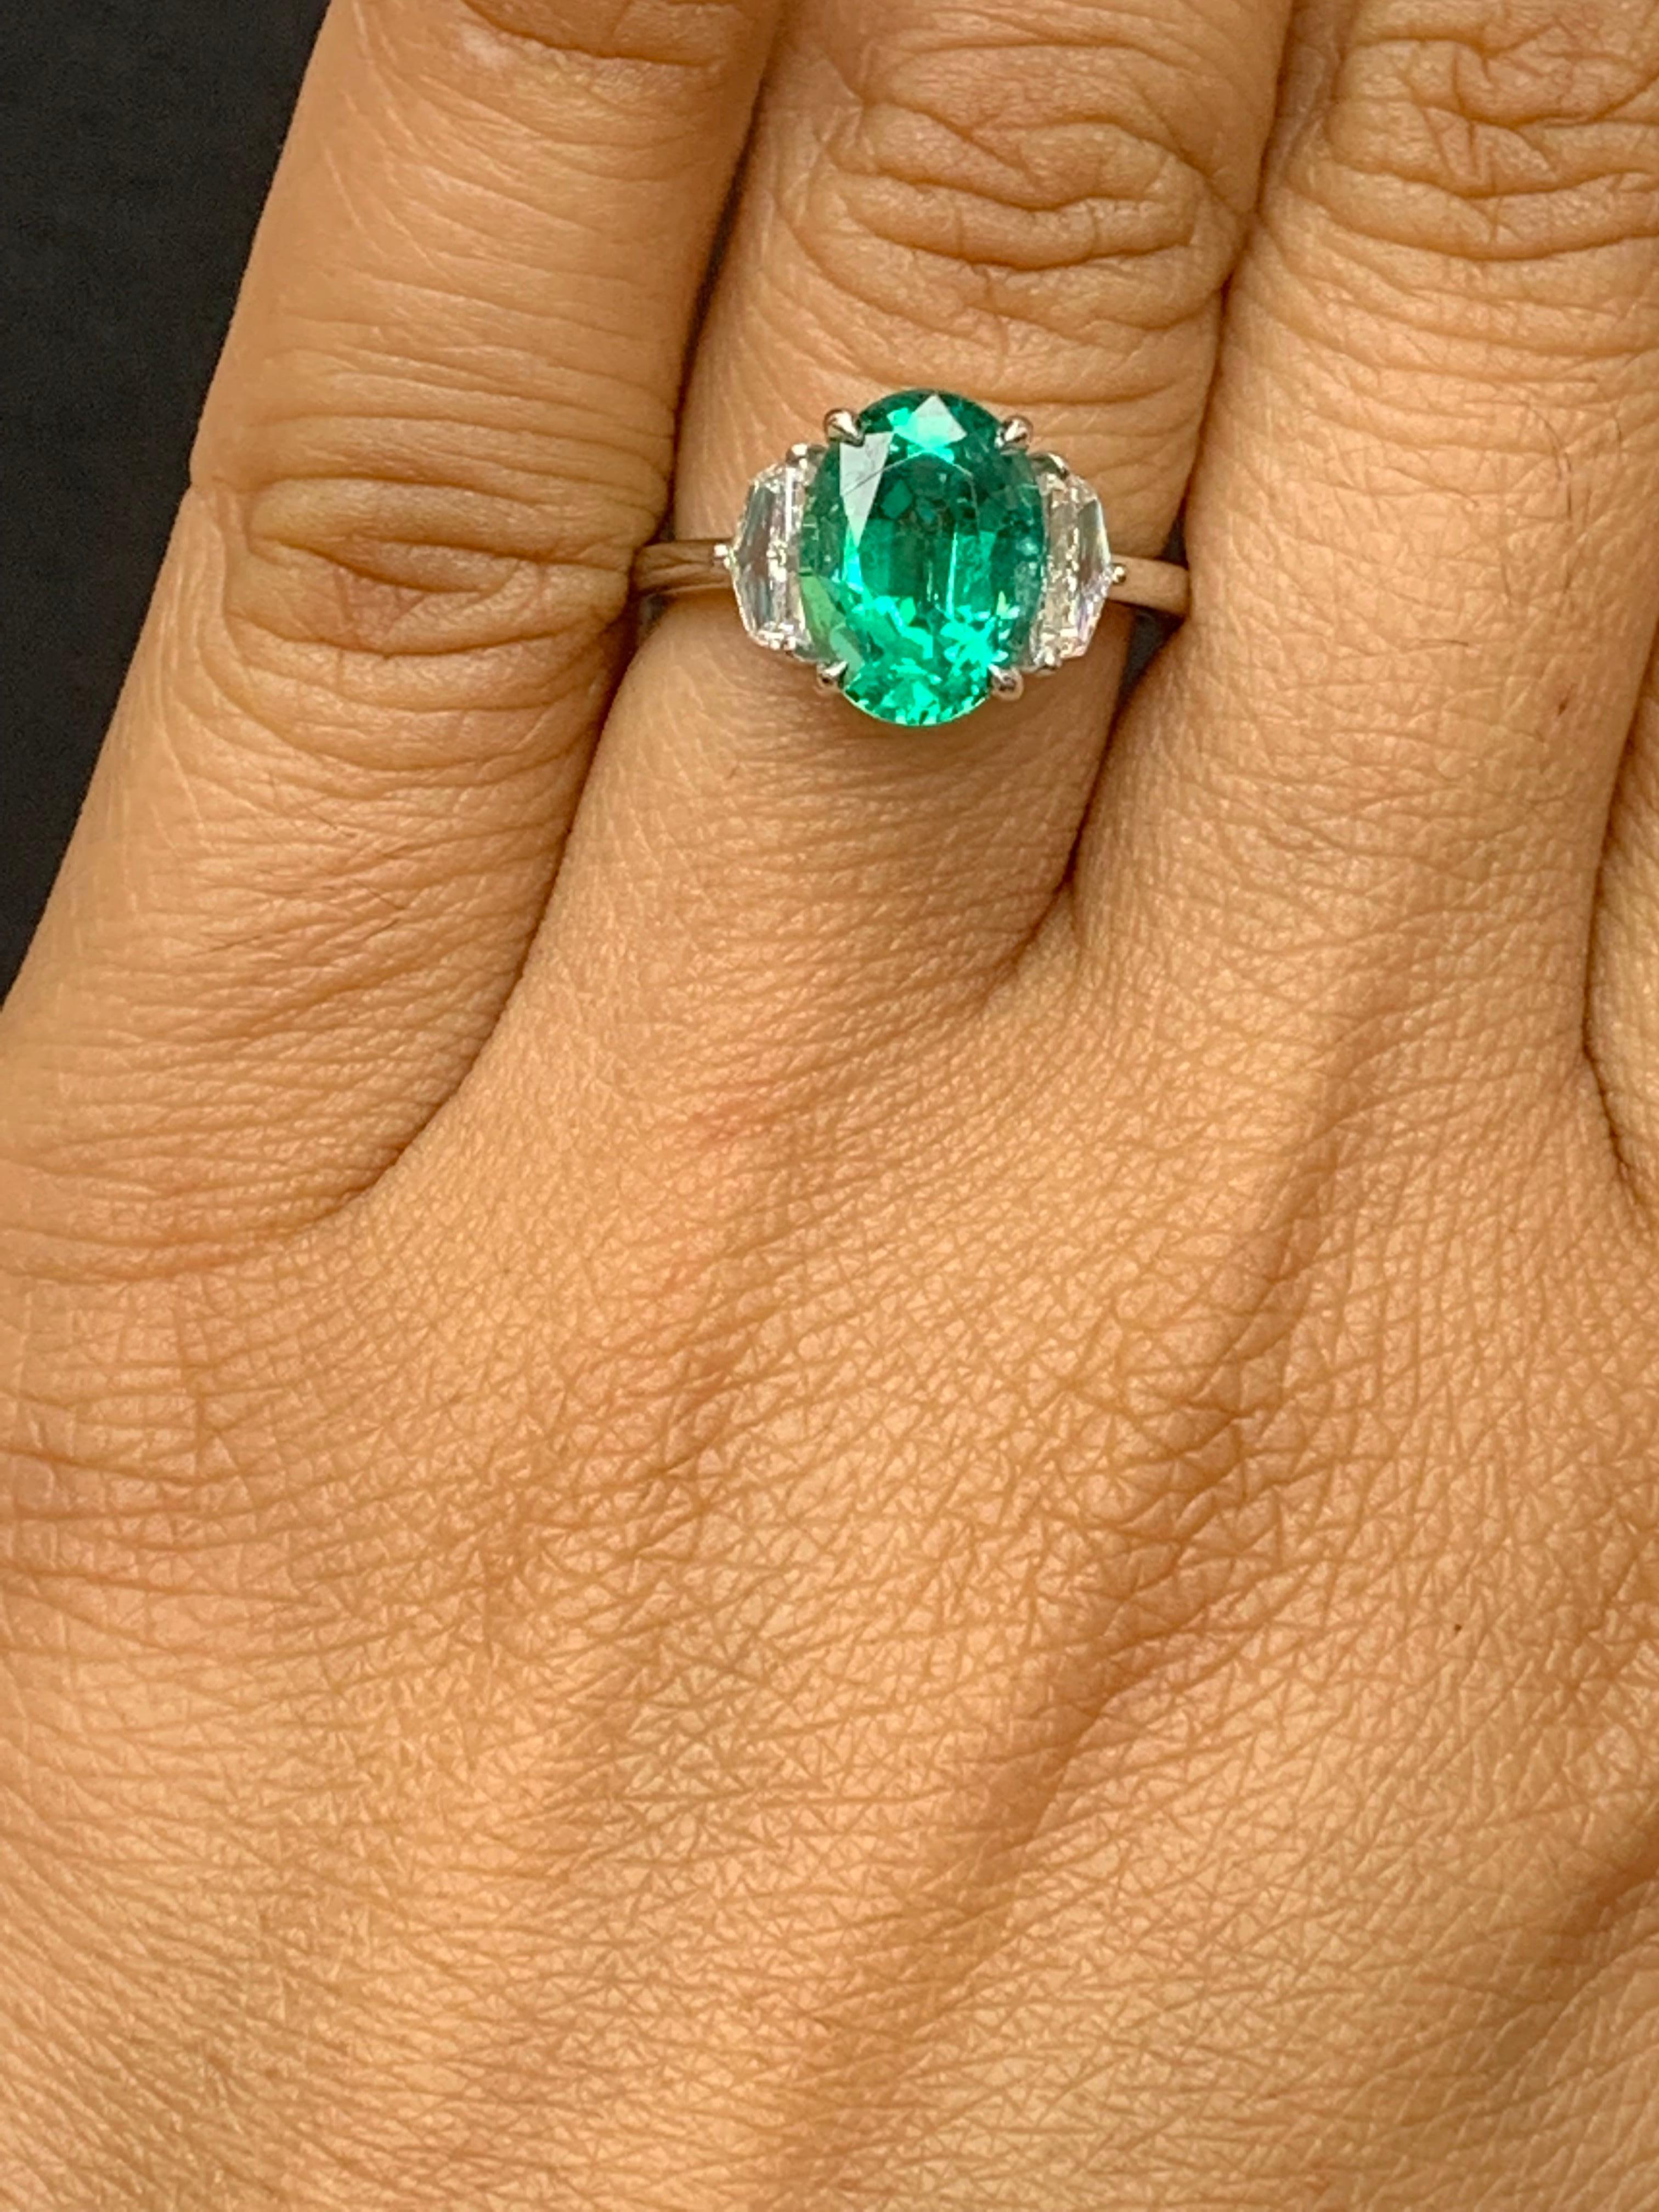 Modern Certified 2.72 Carat Oval Cut Emerald Diamond Engagement Ring in Platinum For Sale